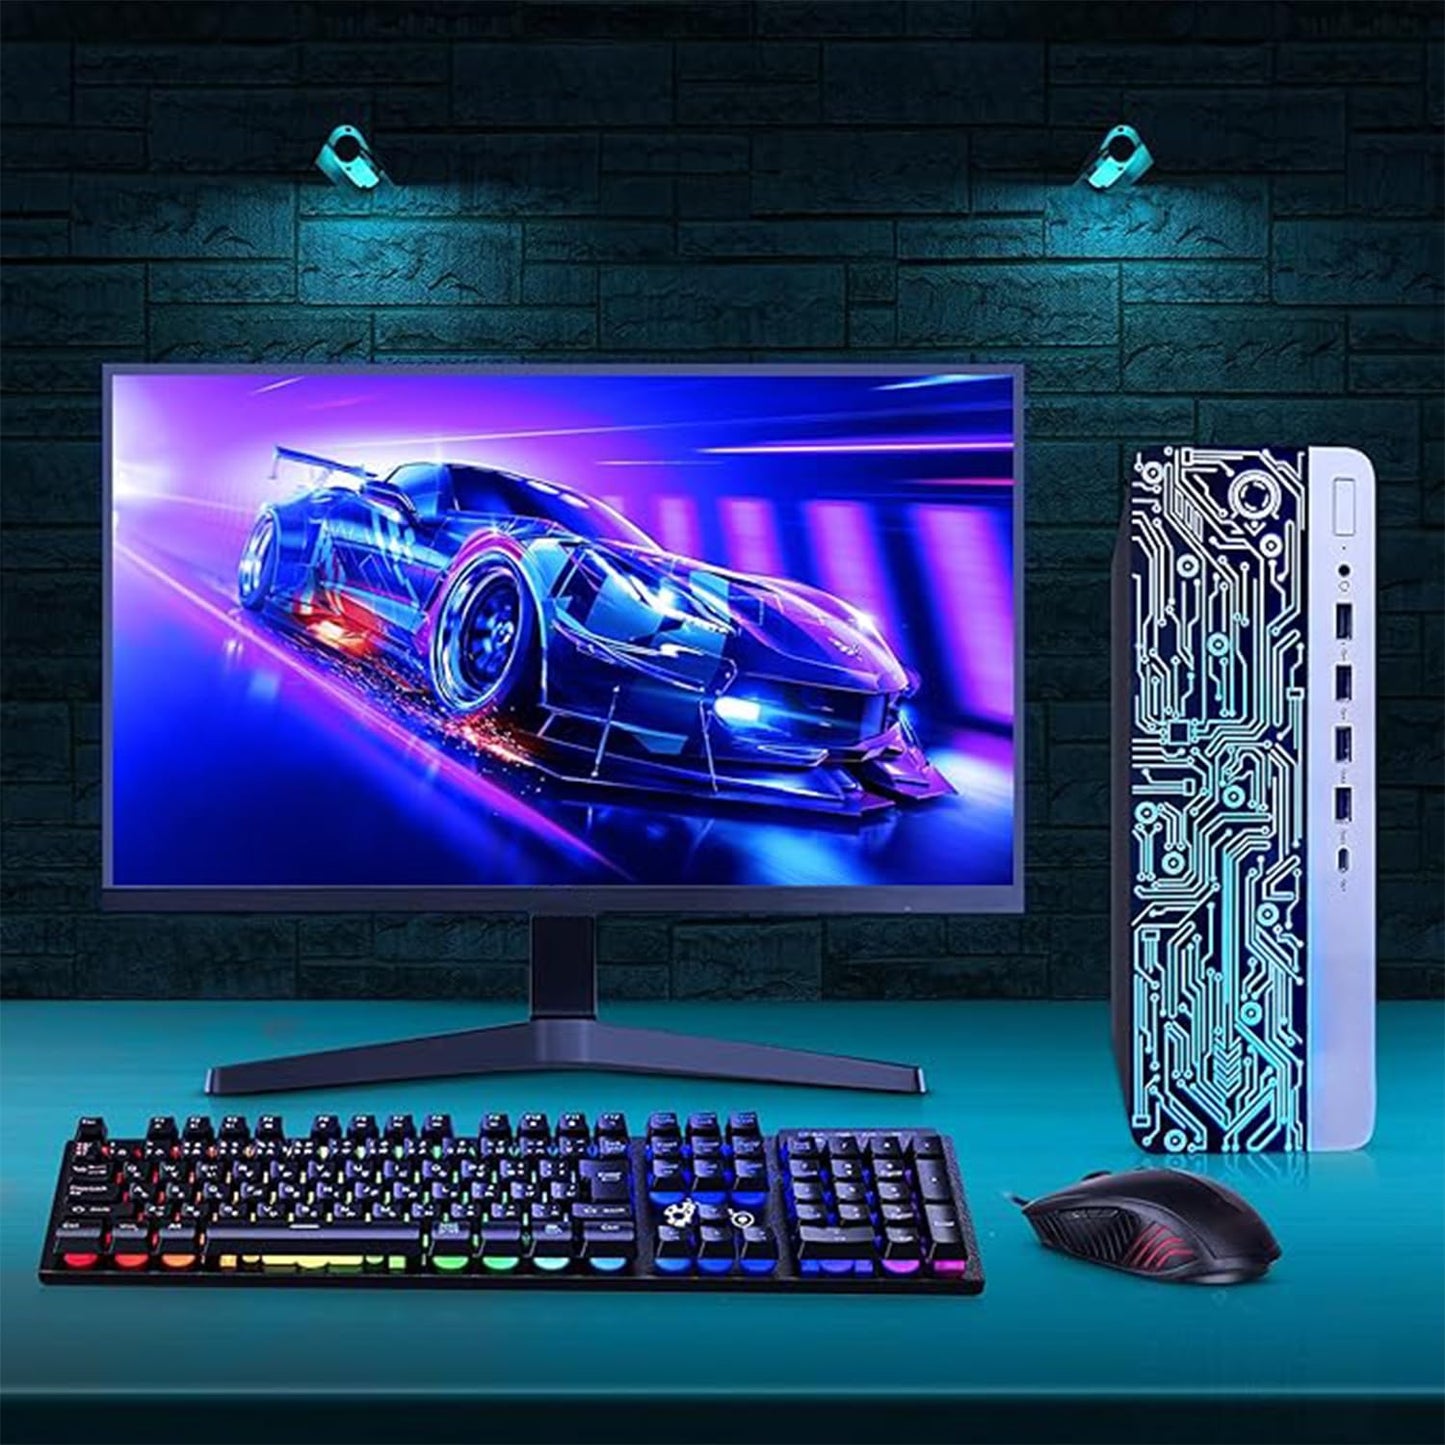 HP ProDesk Desktop RGB Computer PC Intel i5-6th Gen. Quad-Core Processor 8GB DDR4 Ram 256GB SSD, 22 Inch Monitor, Gaming Keyboard and Mouse, Speakers, Built-in WiFi, Win 10 Pro (Renewed)